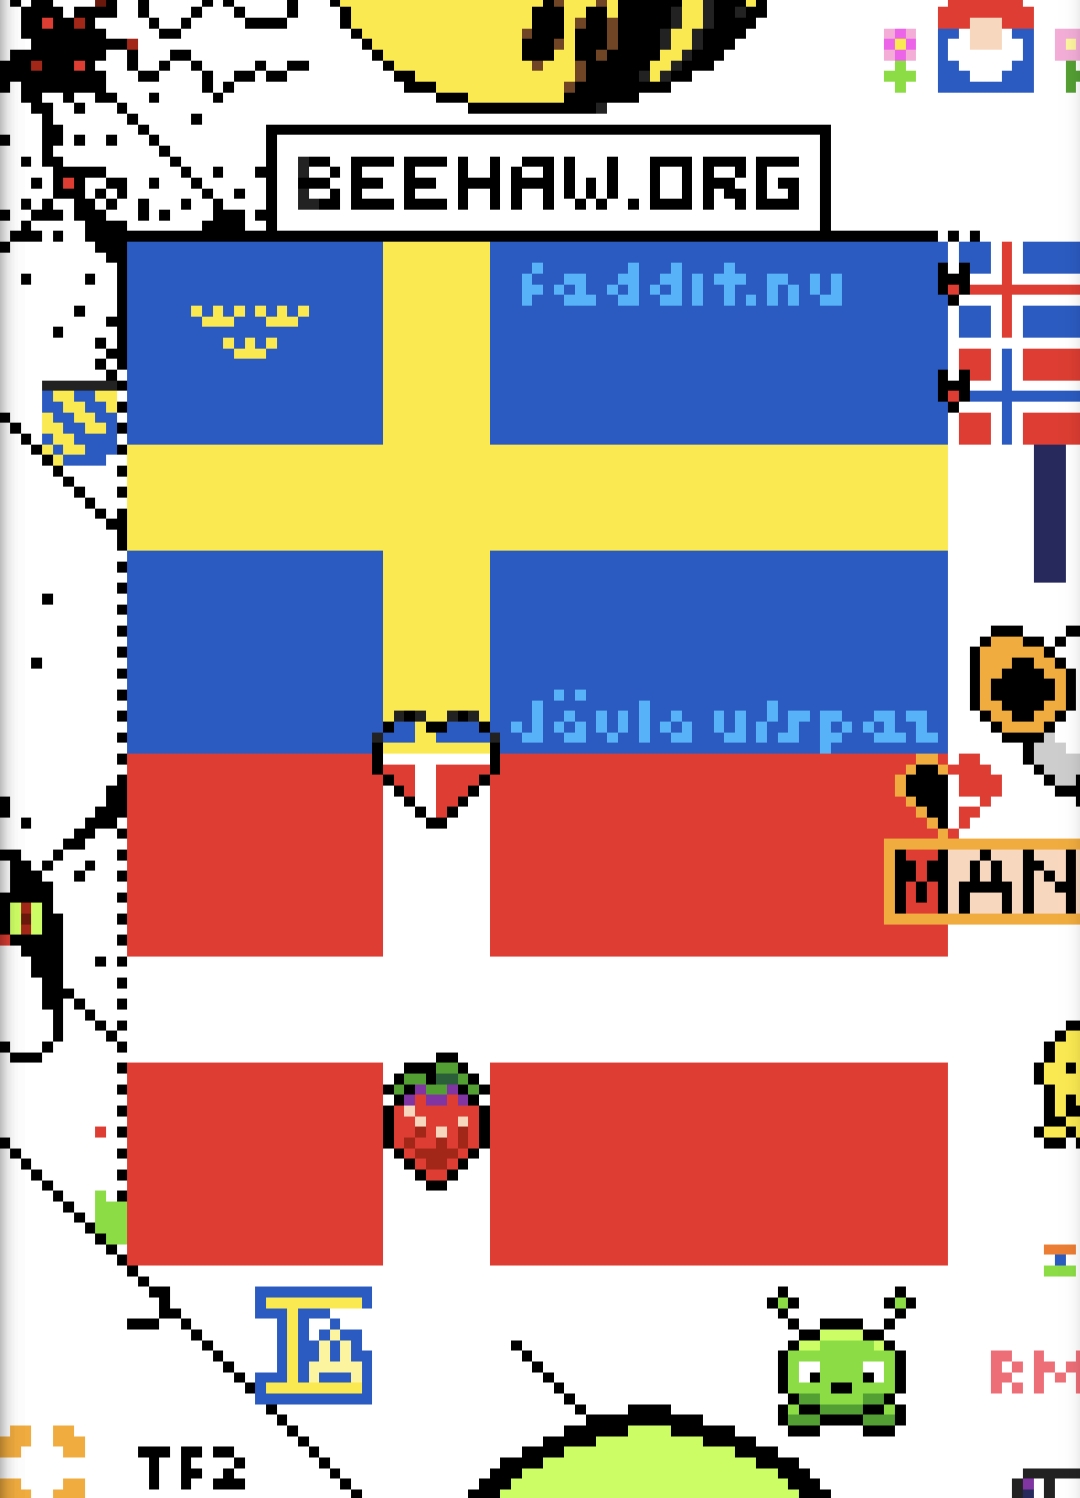 Screenshot of the Lemmy Canvas showing the Strawberry in the white part of the Denmark flag